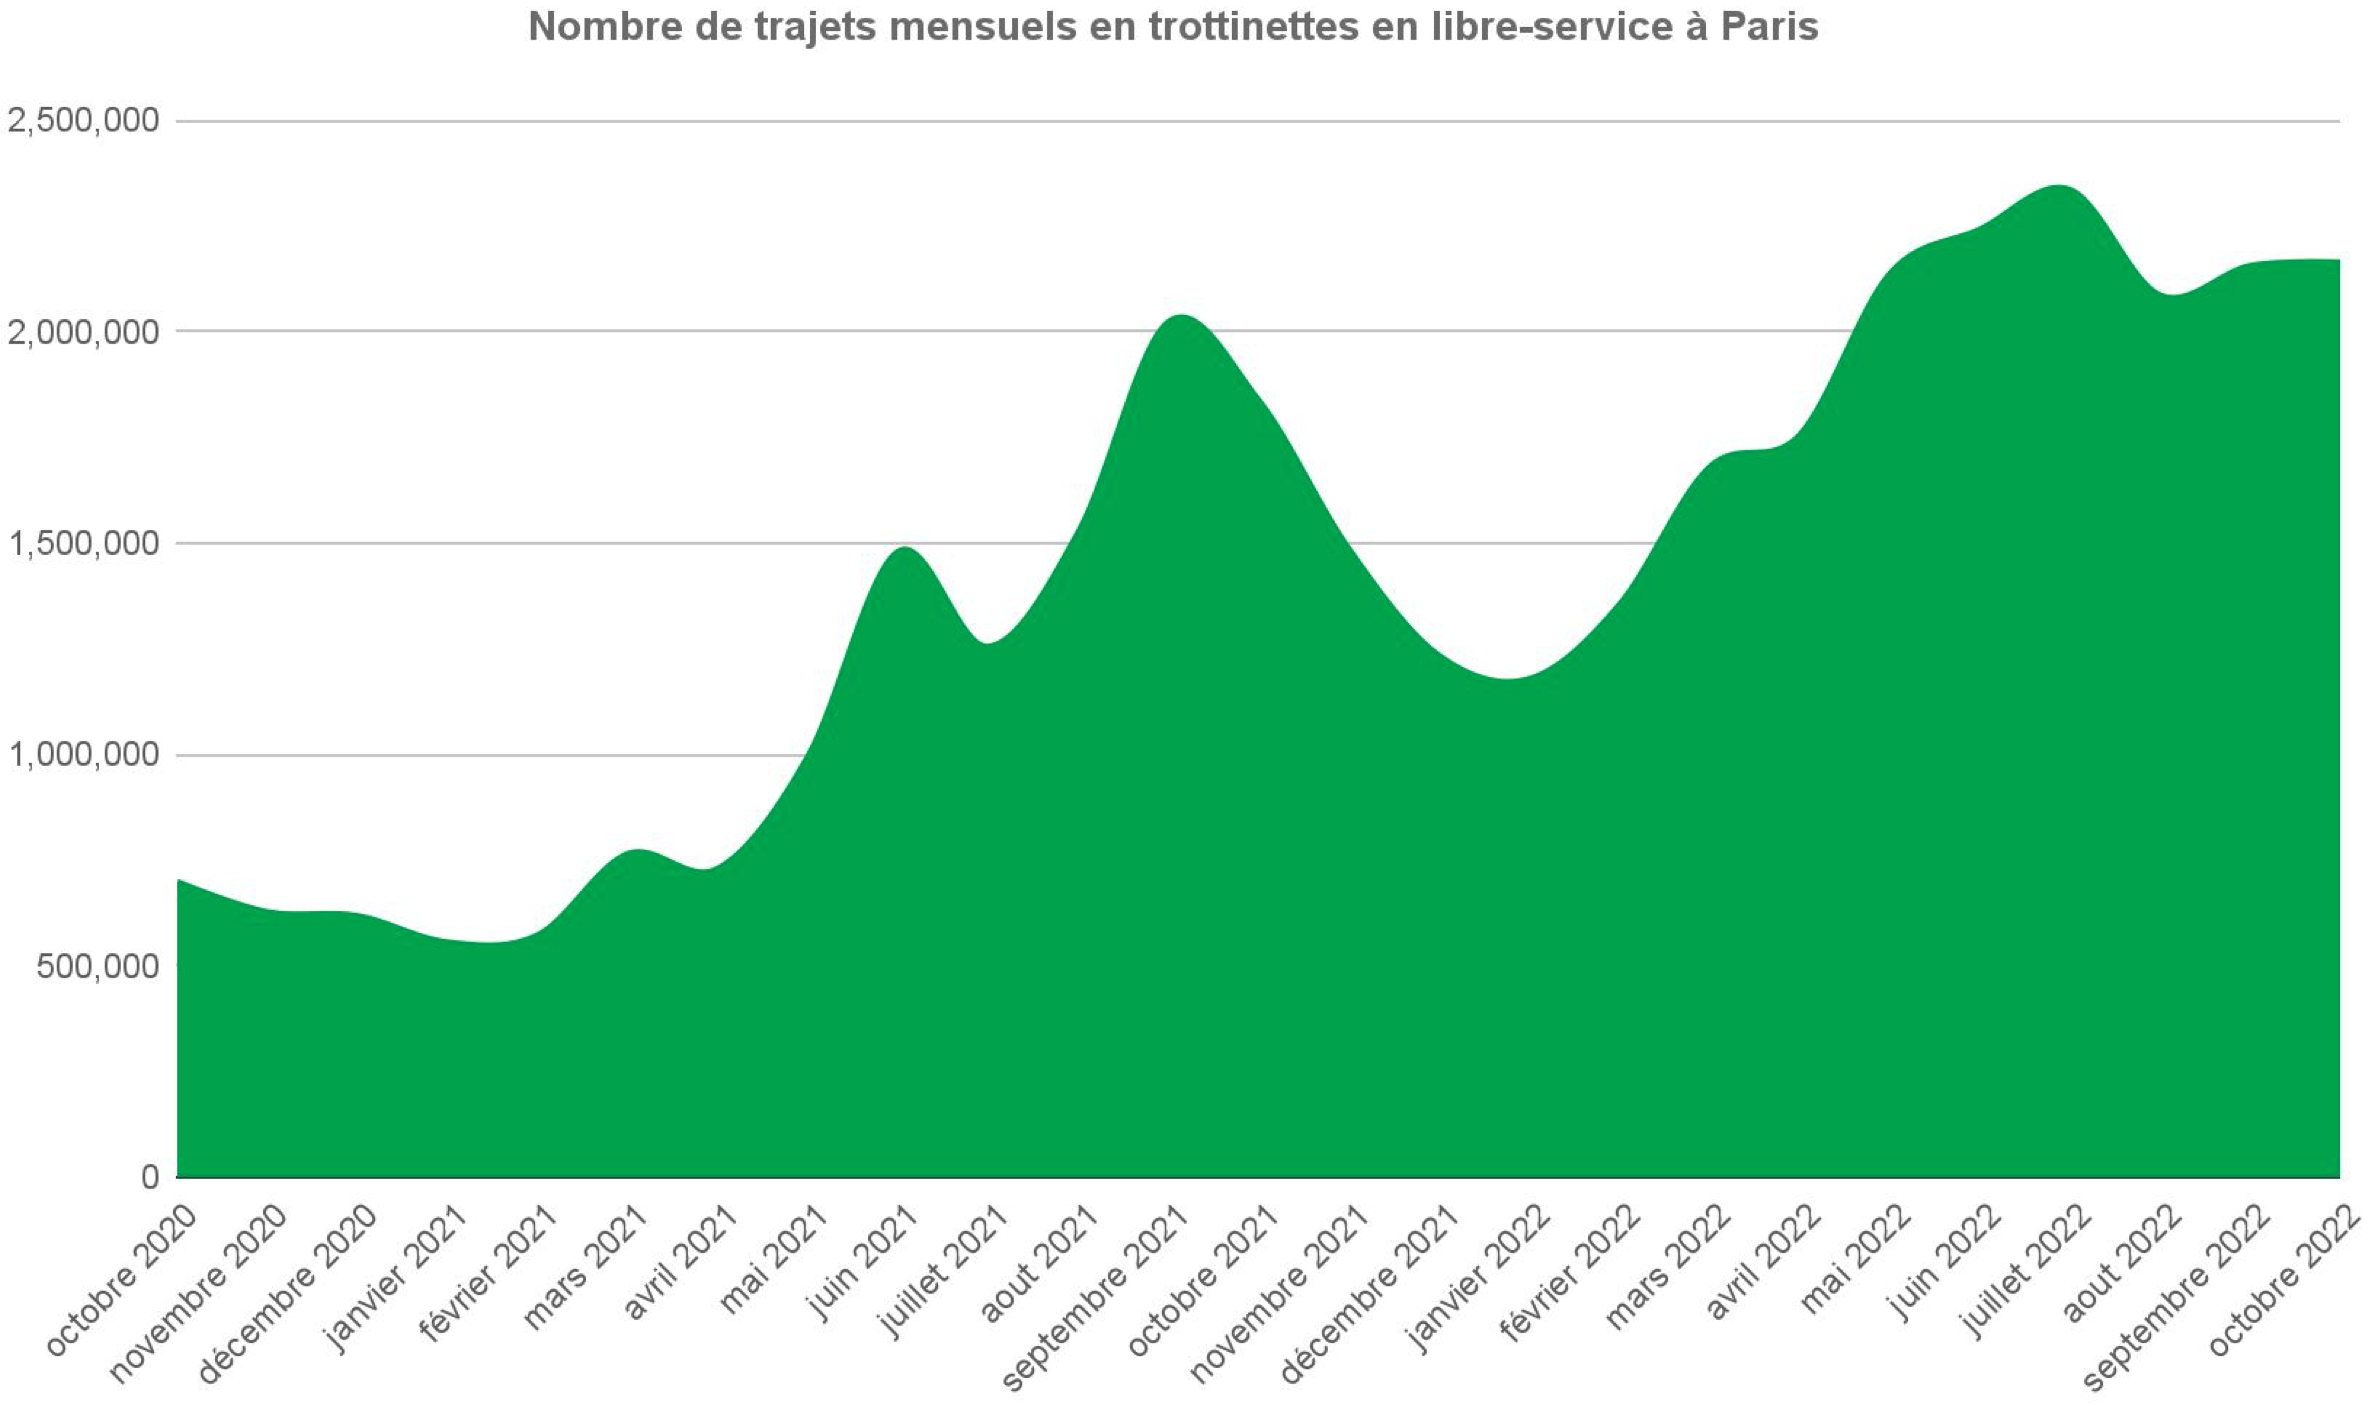 Number of free floating scooter rides per month in Paris